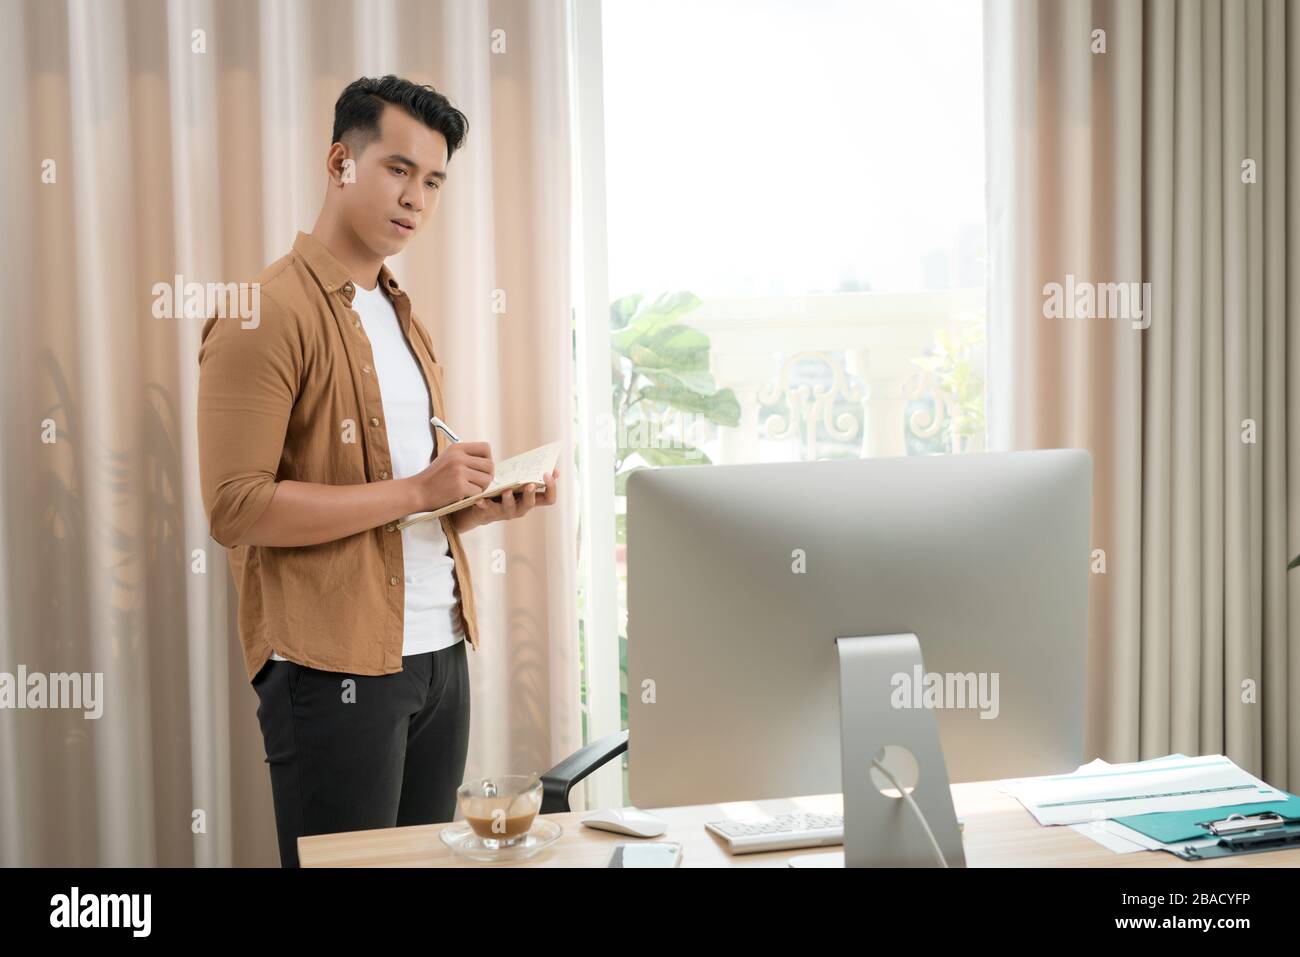 Asian man, aged 25-35 at the desk and smiling happily. He monitors sales on the computer screen. Stock Photo